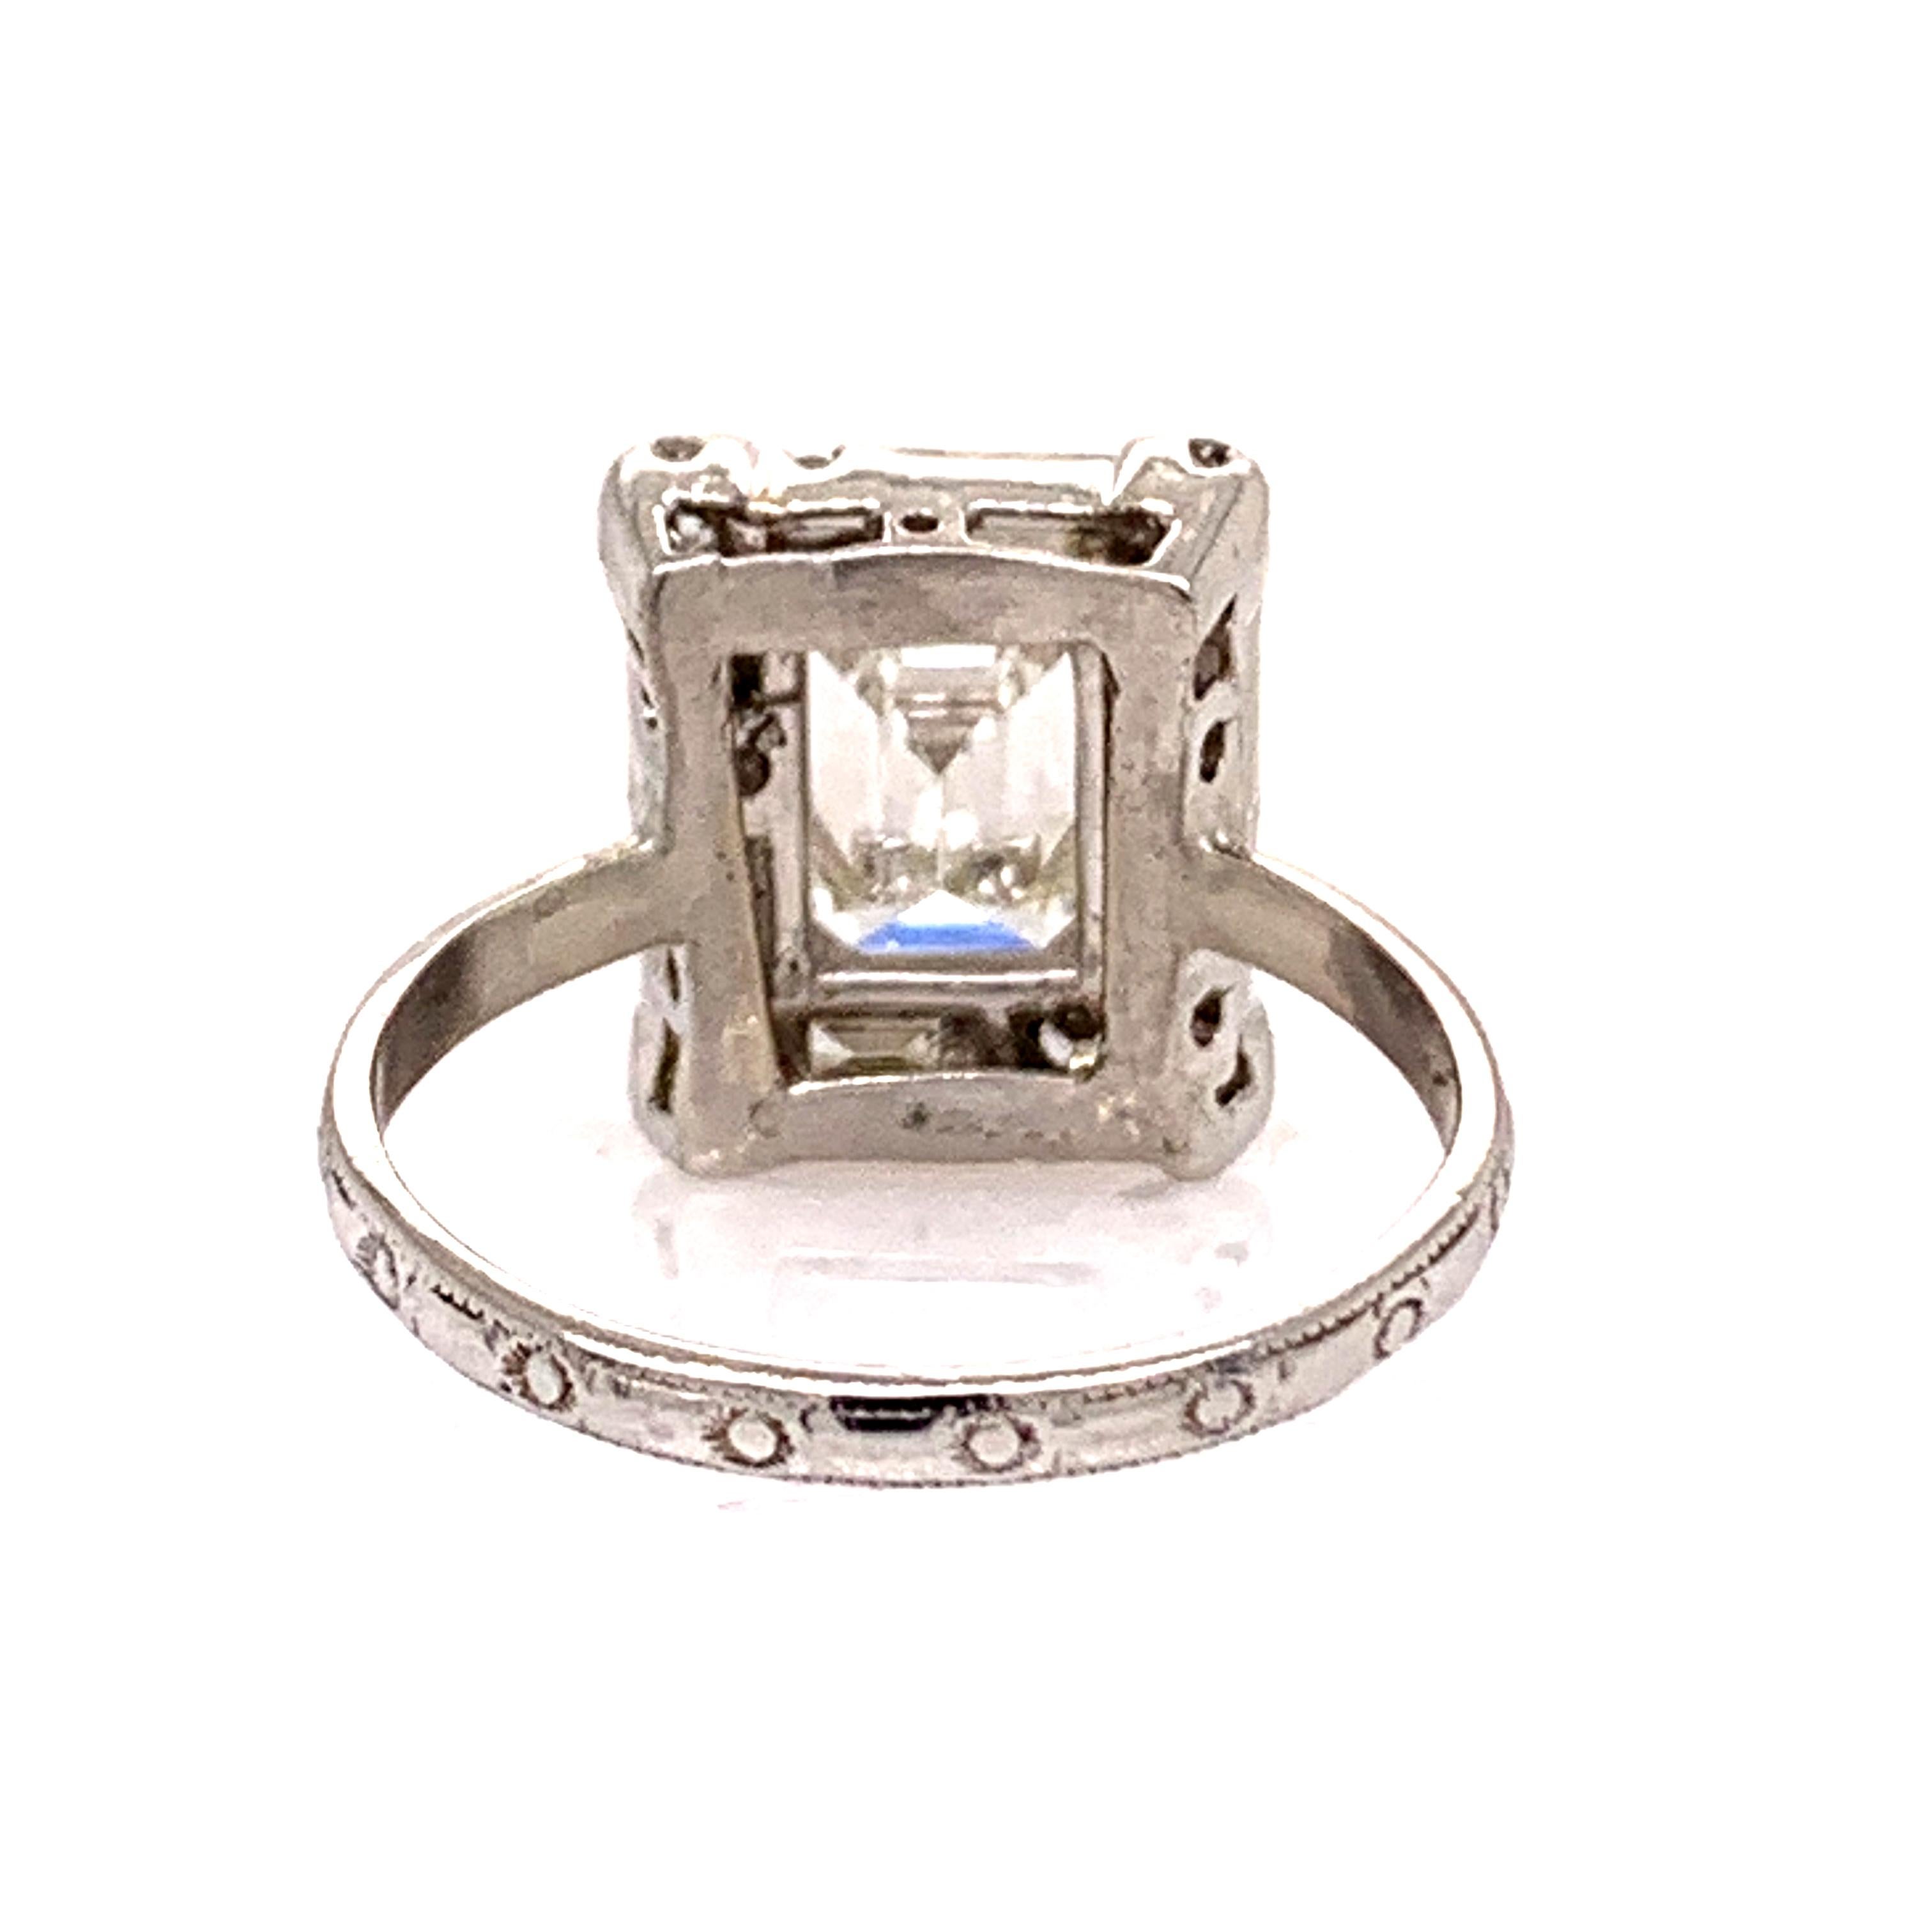 Elegant and captivating emerald cut diamond ring, framed within a border of alternating round and baguette cut diamonds.  The emerald cut diamond center is 2.19 carats, graded I color and SI1 clarity.   The diamond is accompanied by a GIA report. 